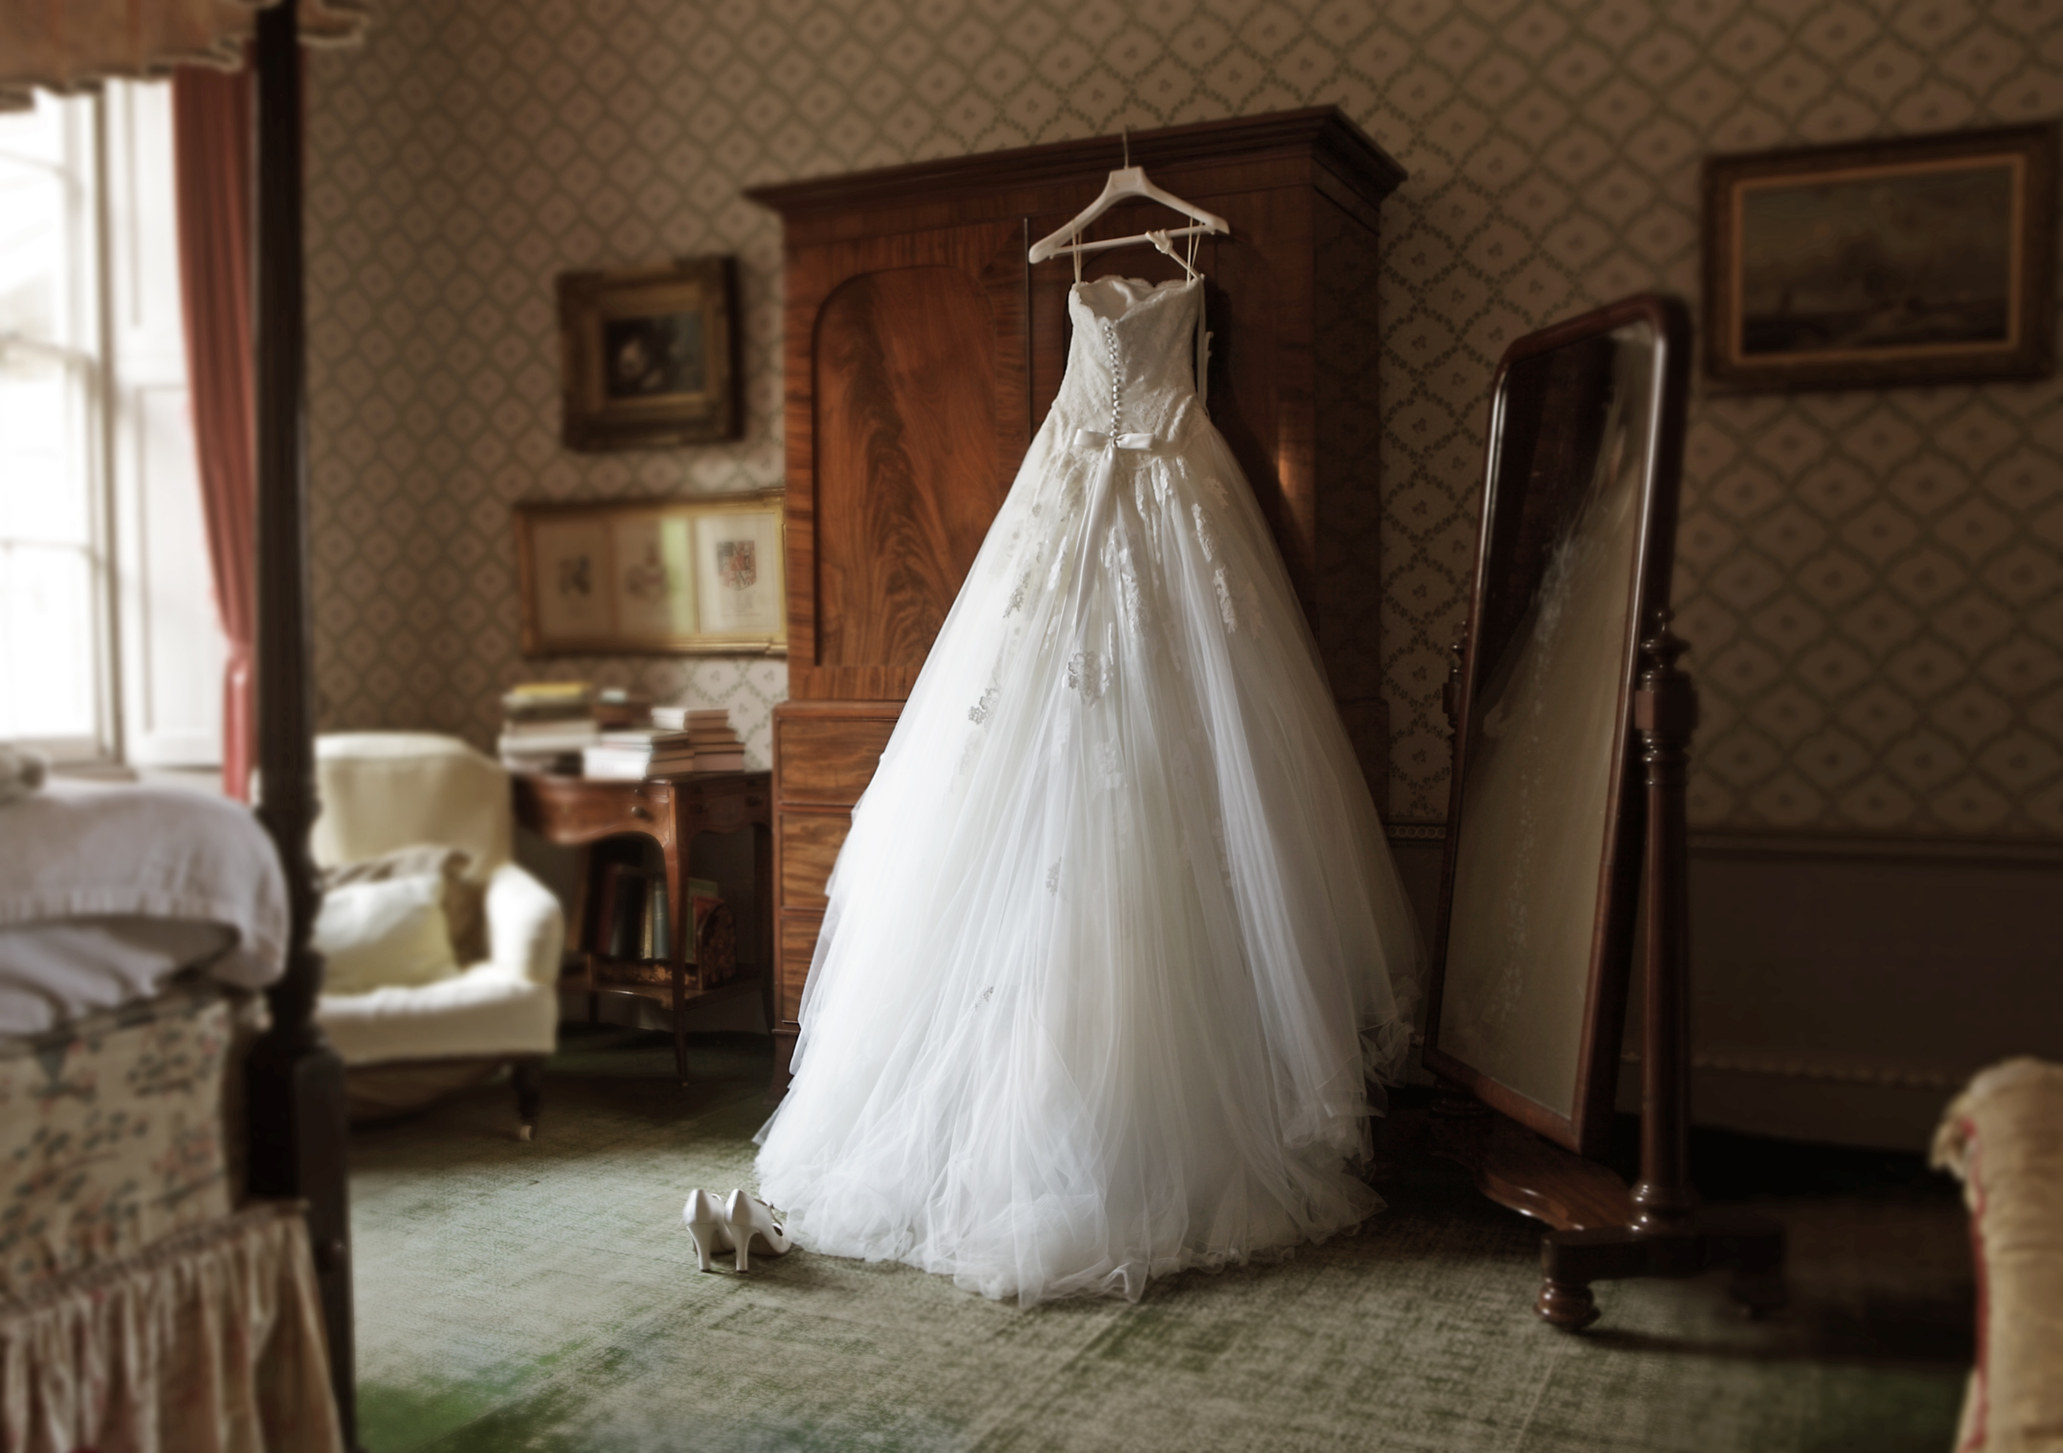 A wedding dress hanging on an armoire.